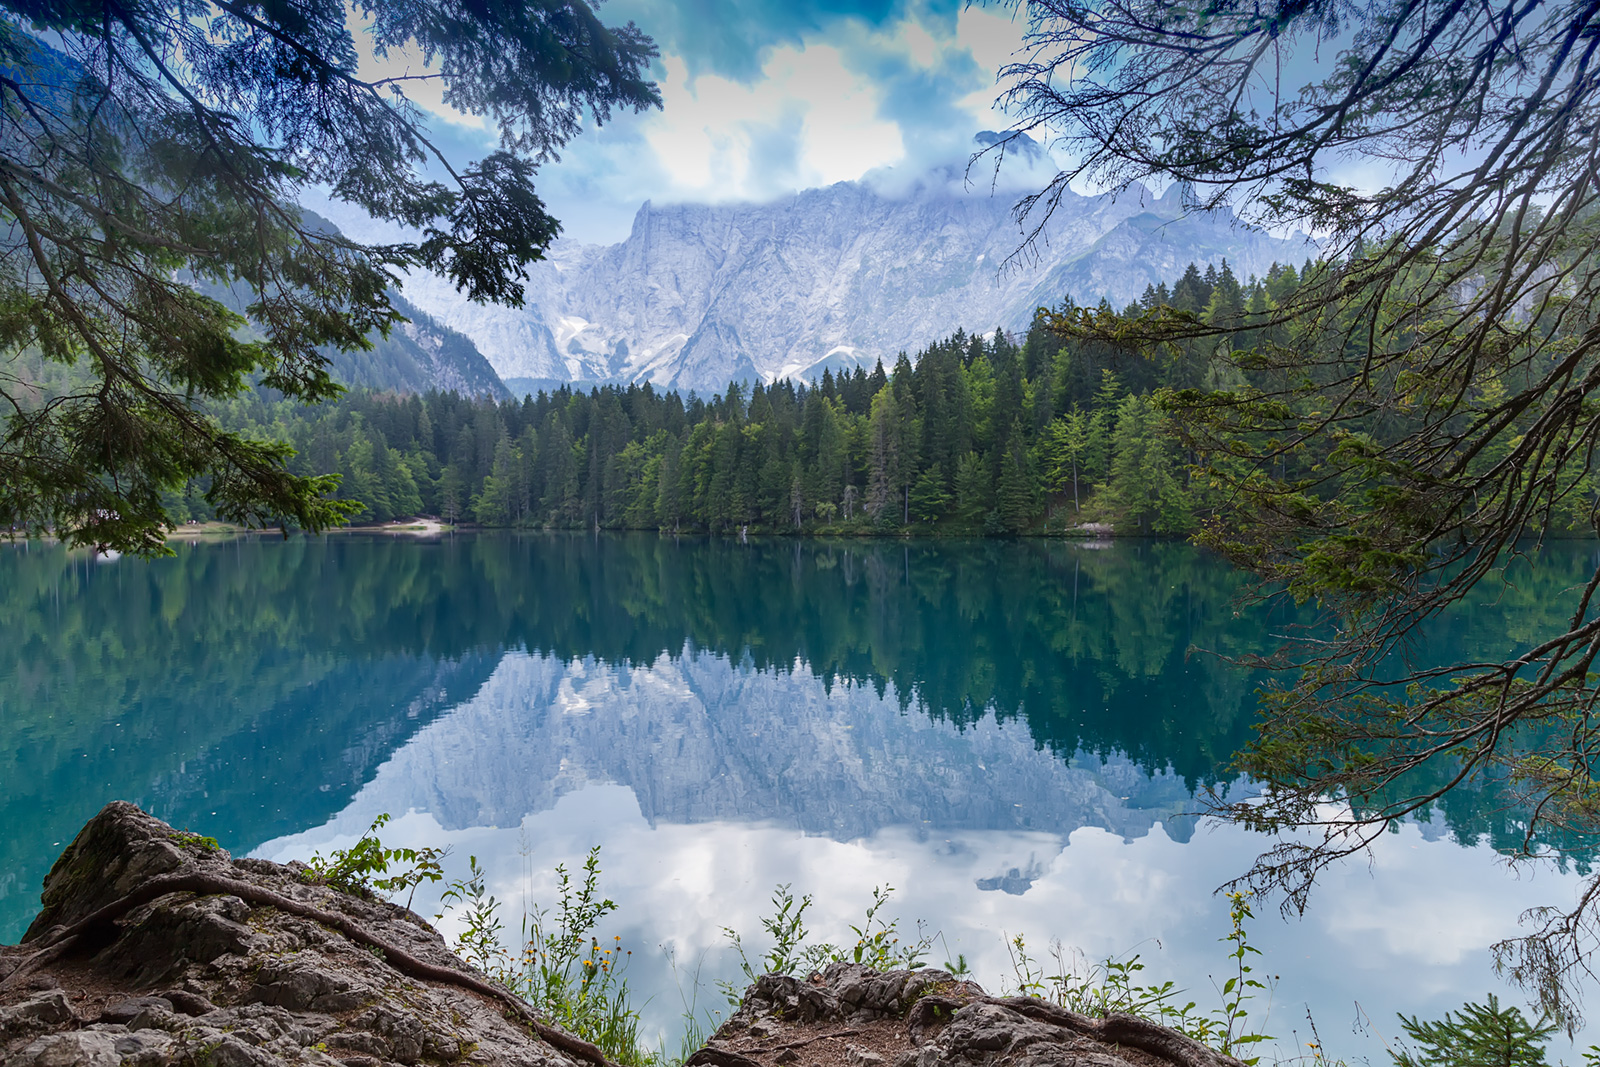 The lower Belopeško lake (Laghi di Fusine in italian) with magnificient Mangart mountain massif in the backdrop offers good opportunities for a snapshot.